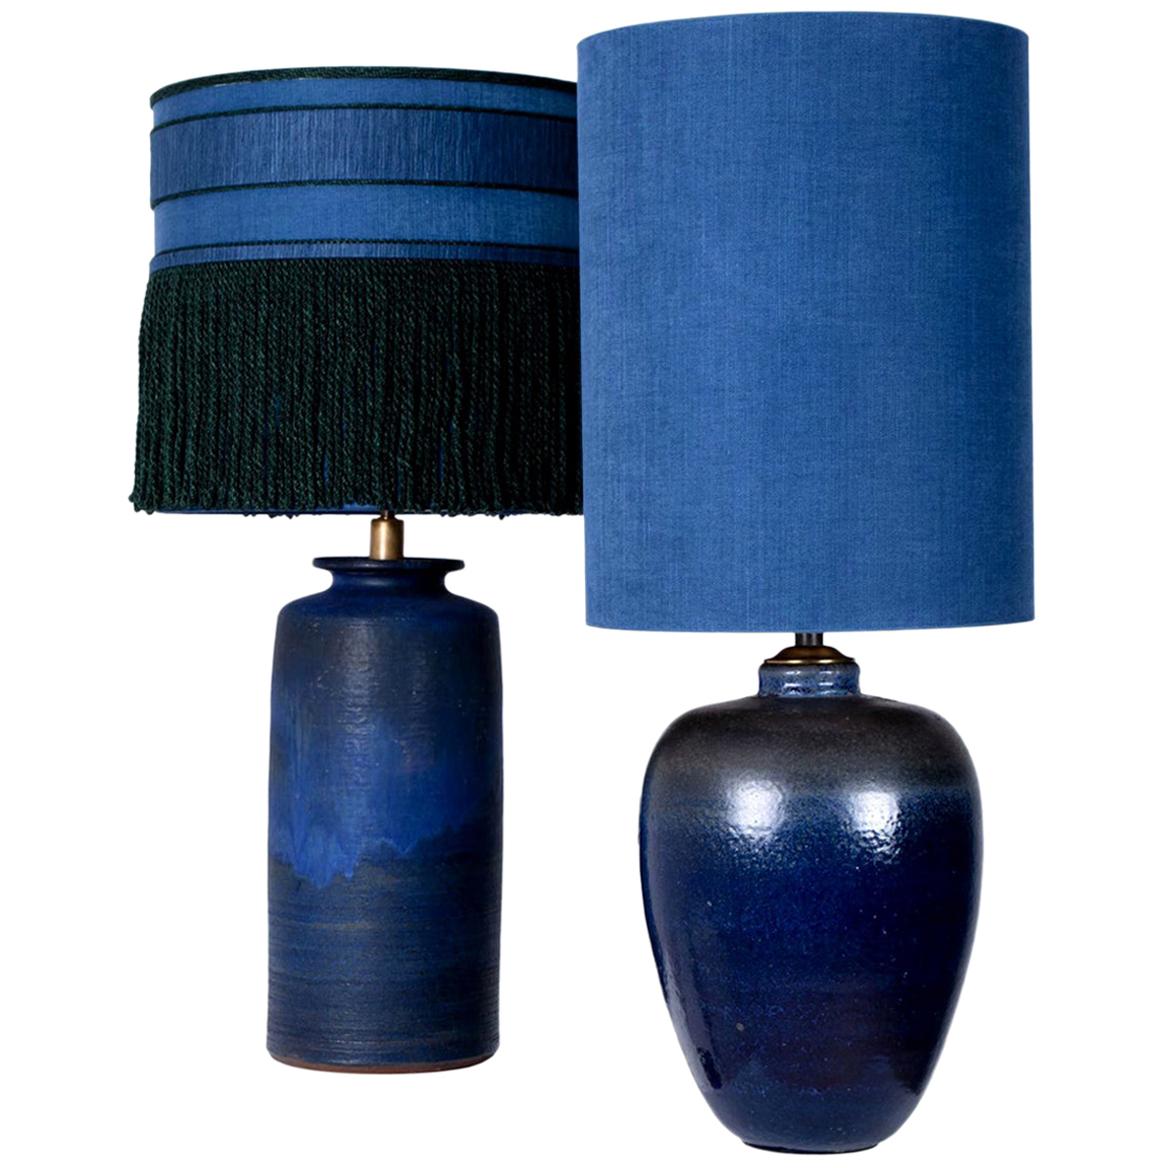 Pair of Extra Large Ceramic Table Lamps with Custom Made Lampshades, René Houben